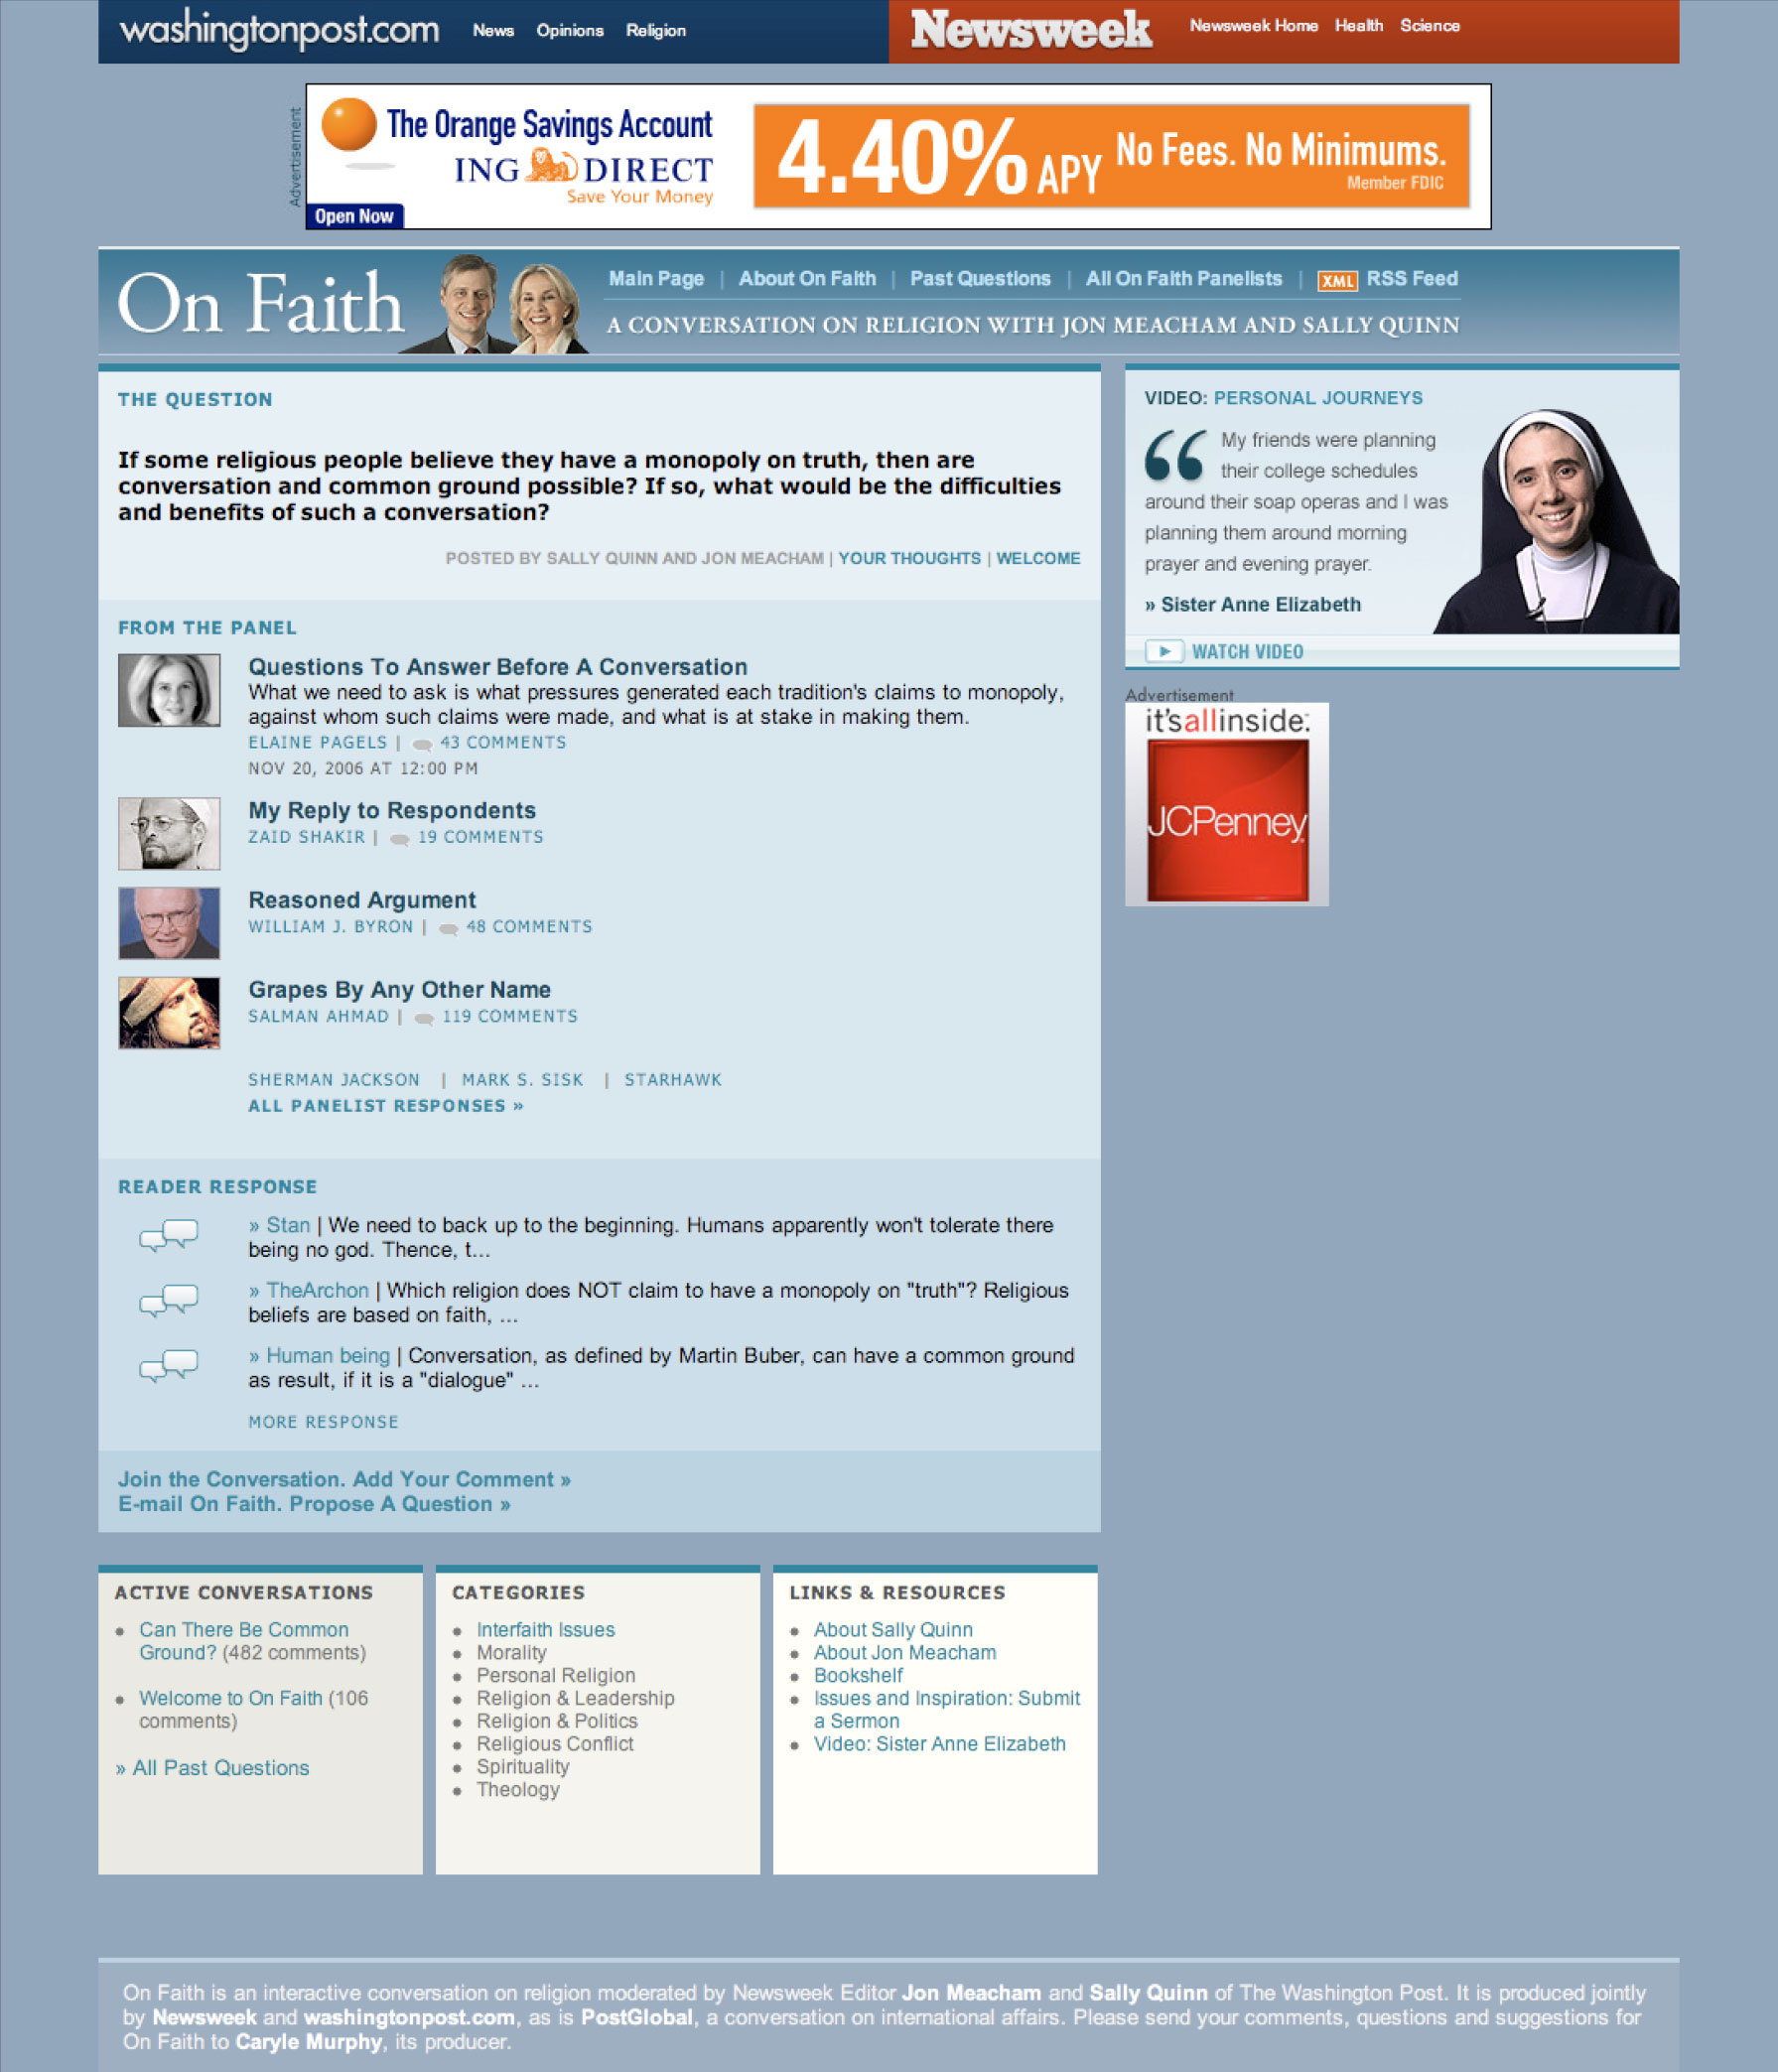 Screencap of the home page of OnFaith on the Washington Post website